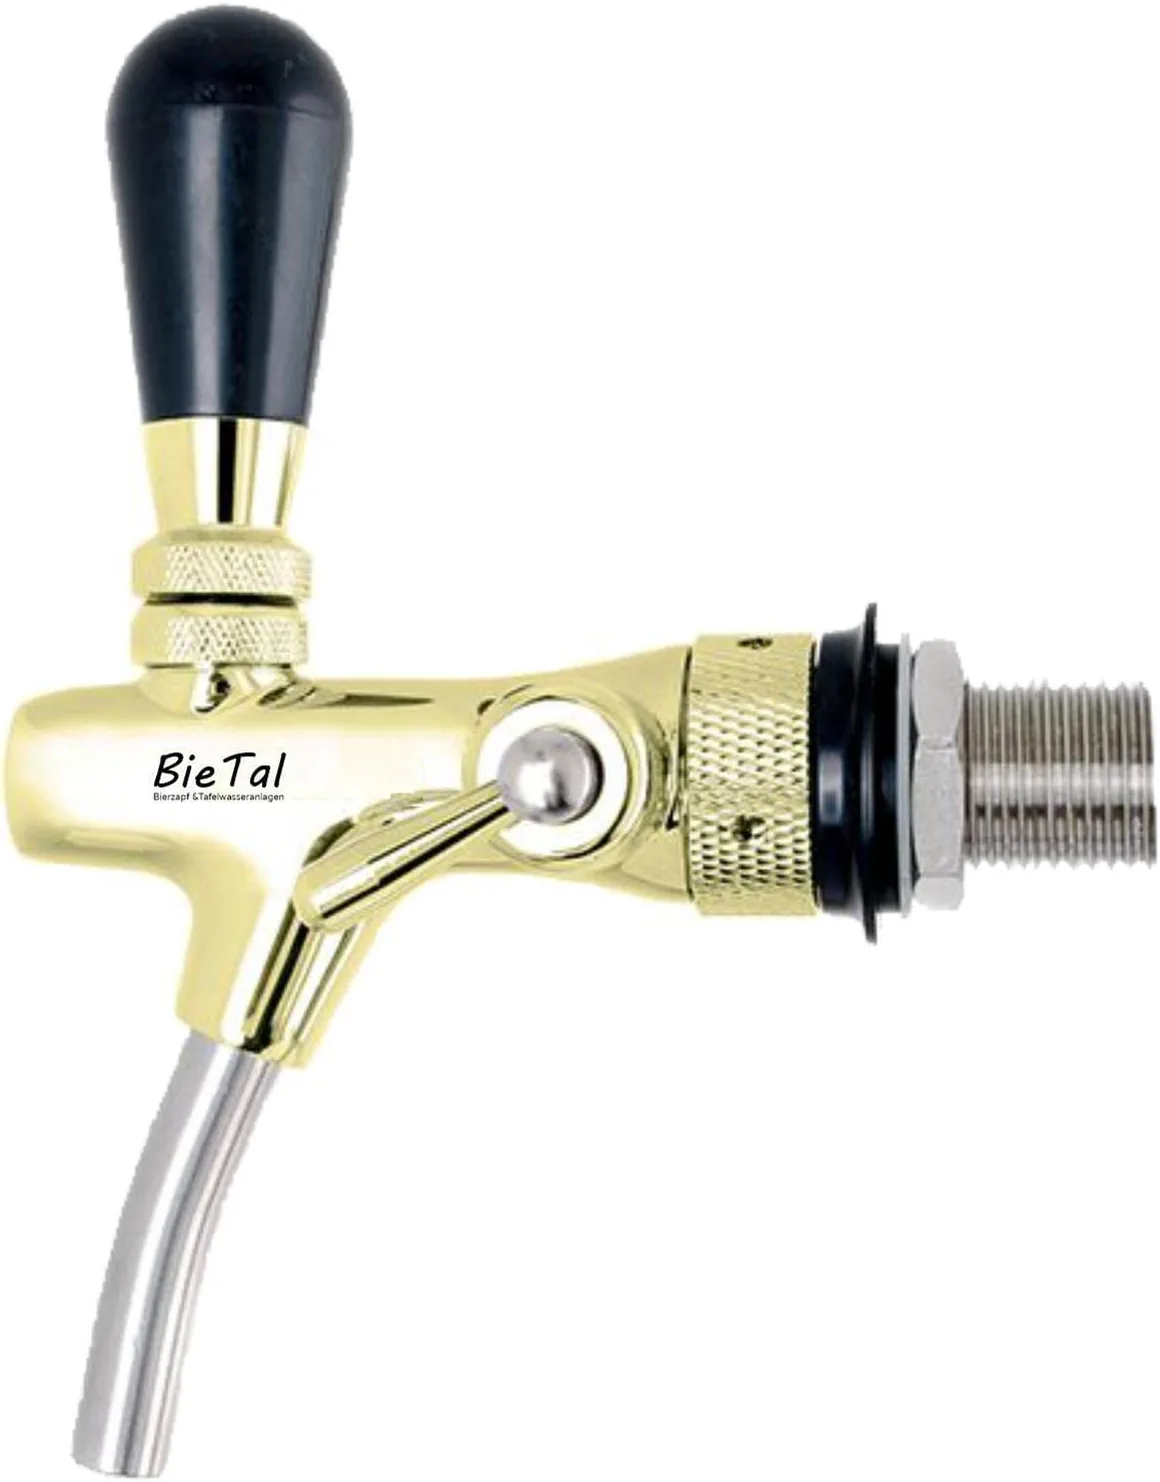 BieTal® Compensator tap, tap adjustable beer tap with foam button, gold-plated, 35 mm